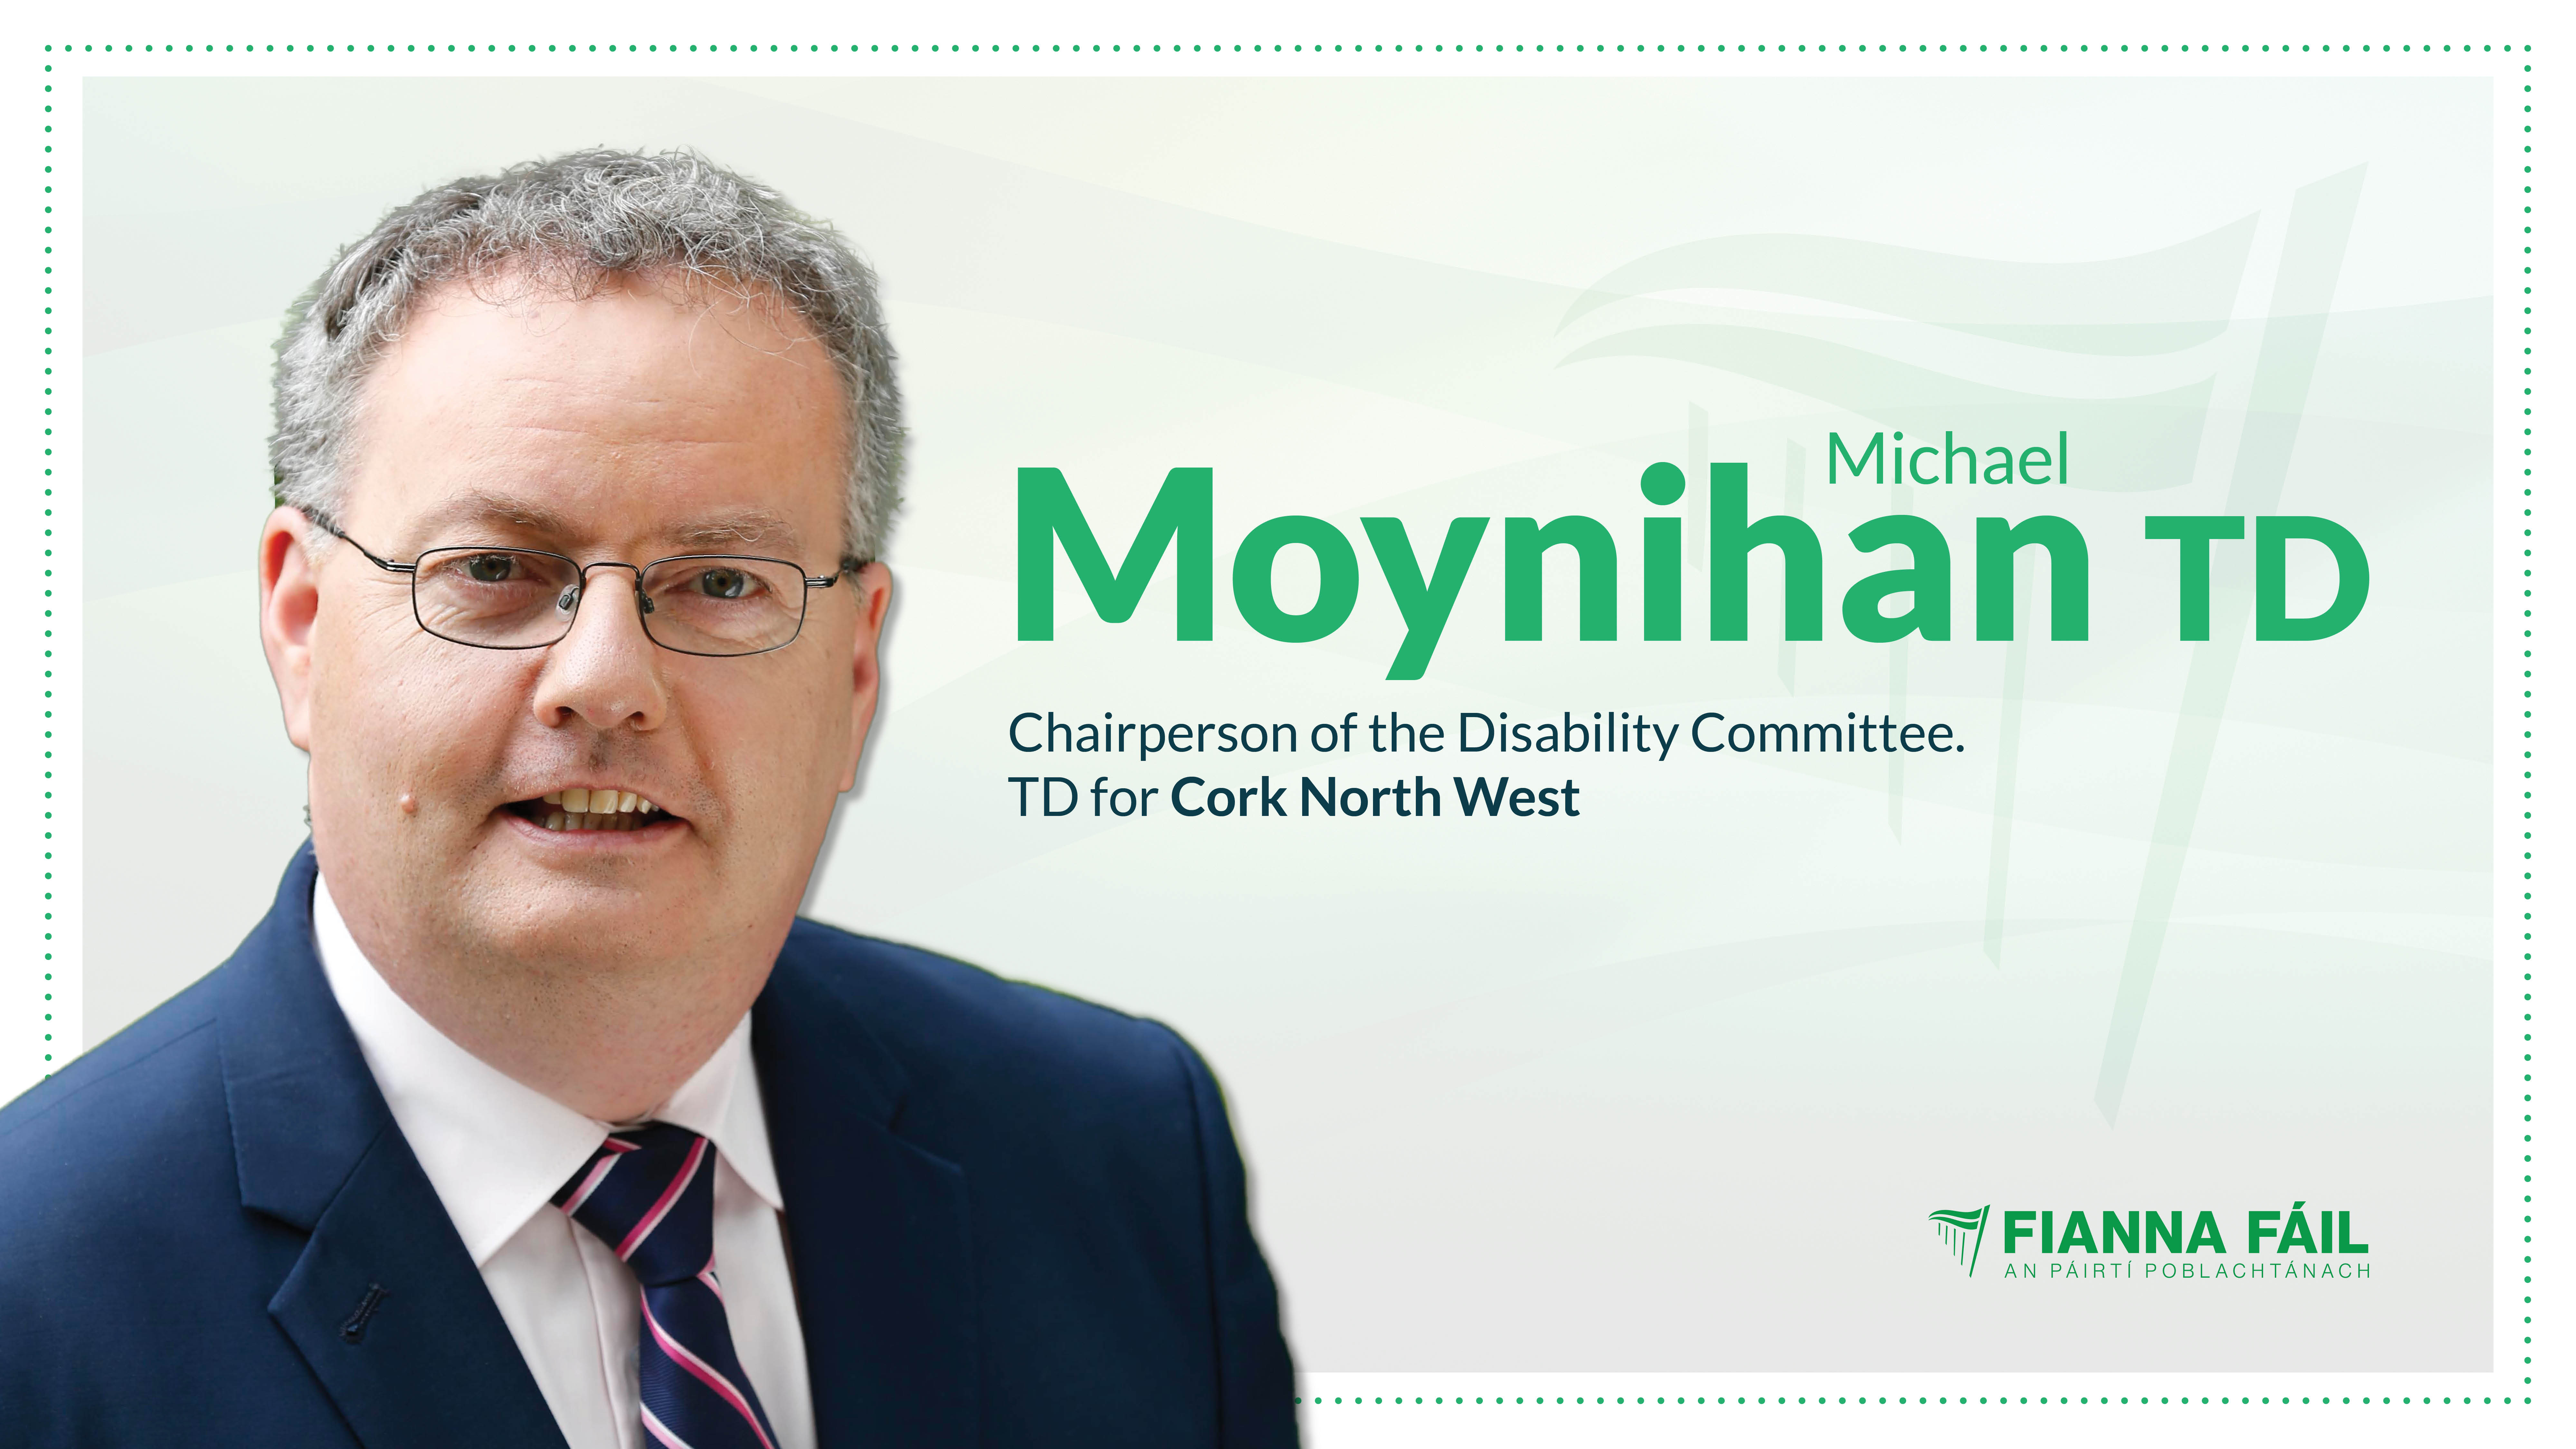 Primary Medical Certificate applications must be processed as a matter of urgency – Moynihan